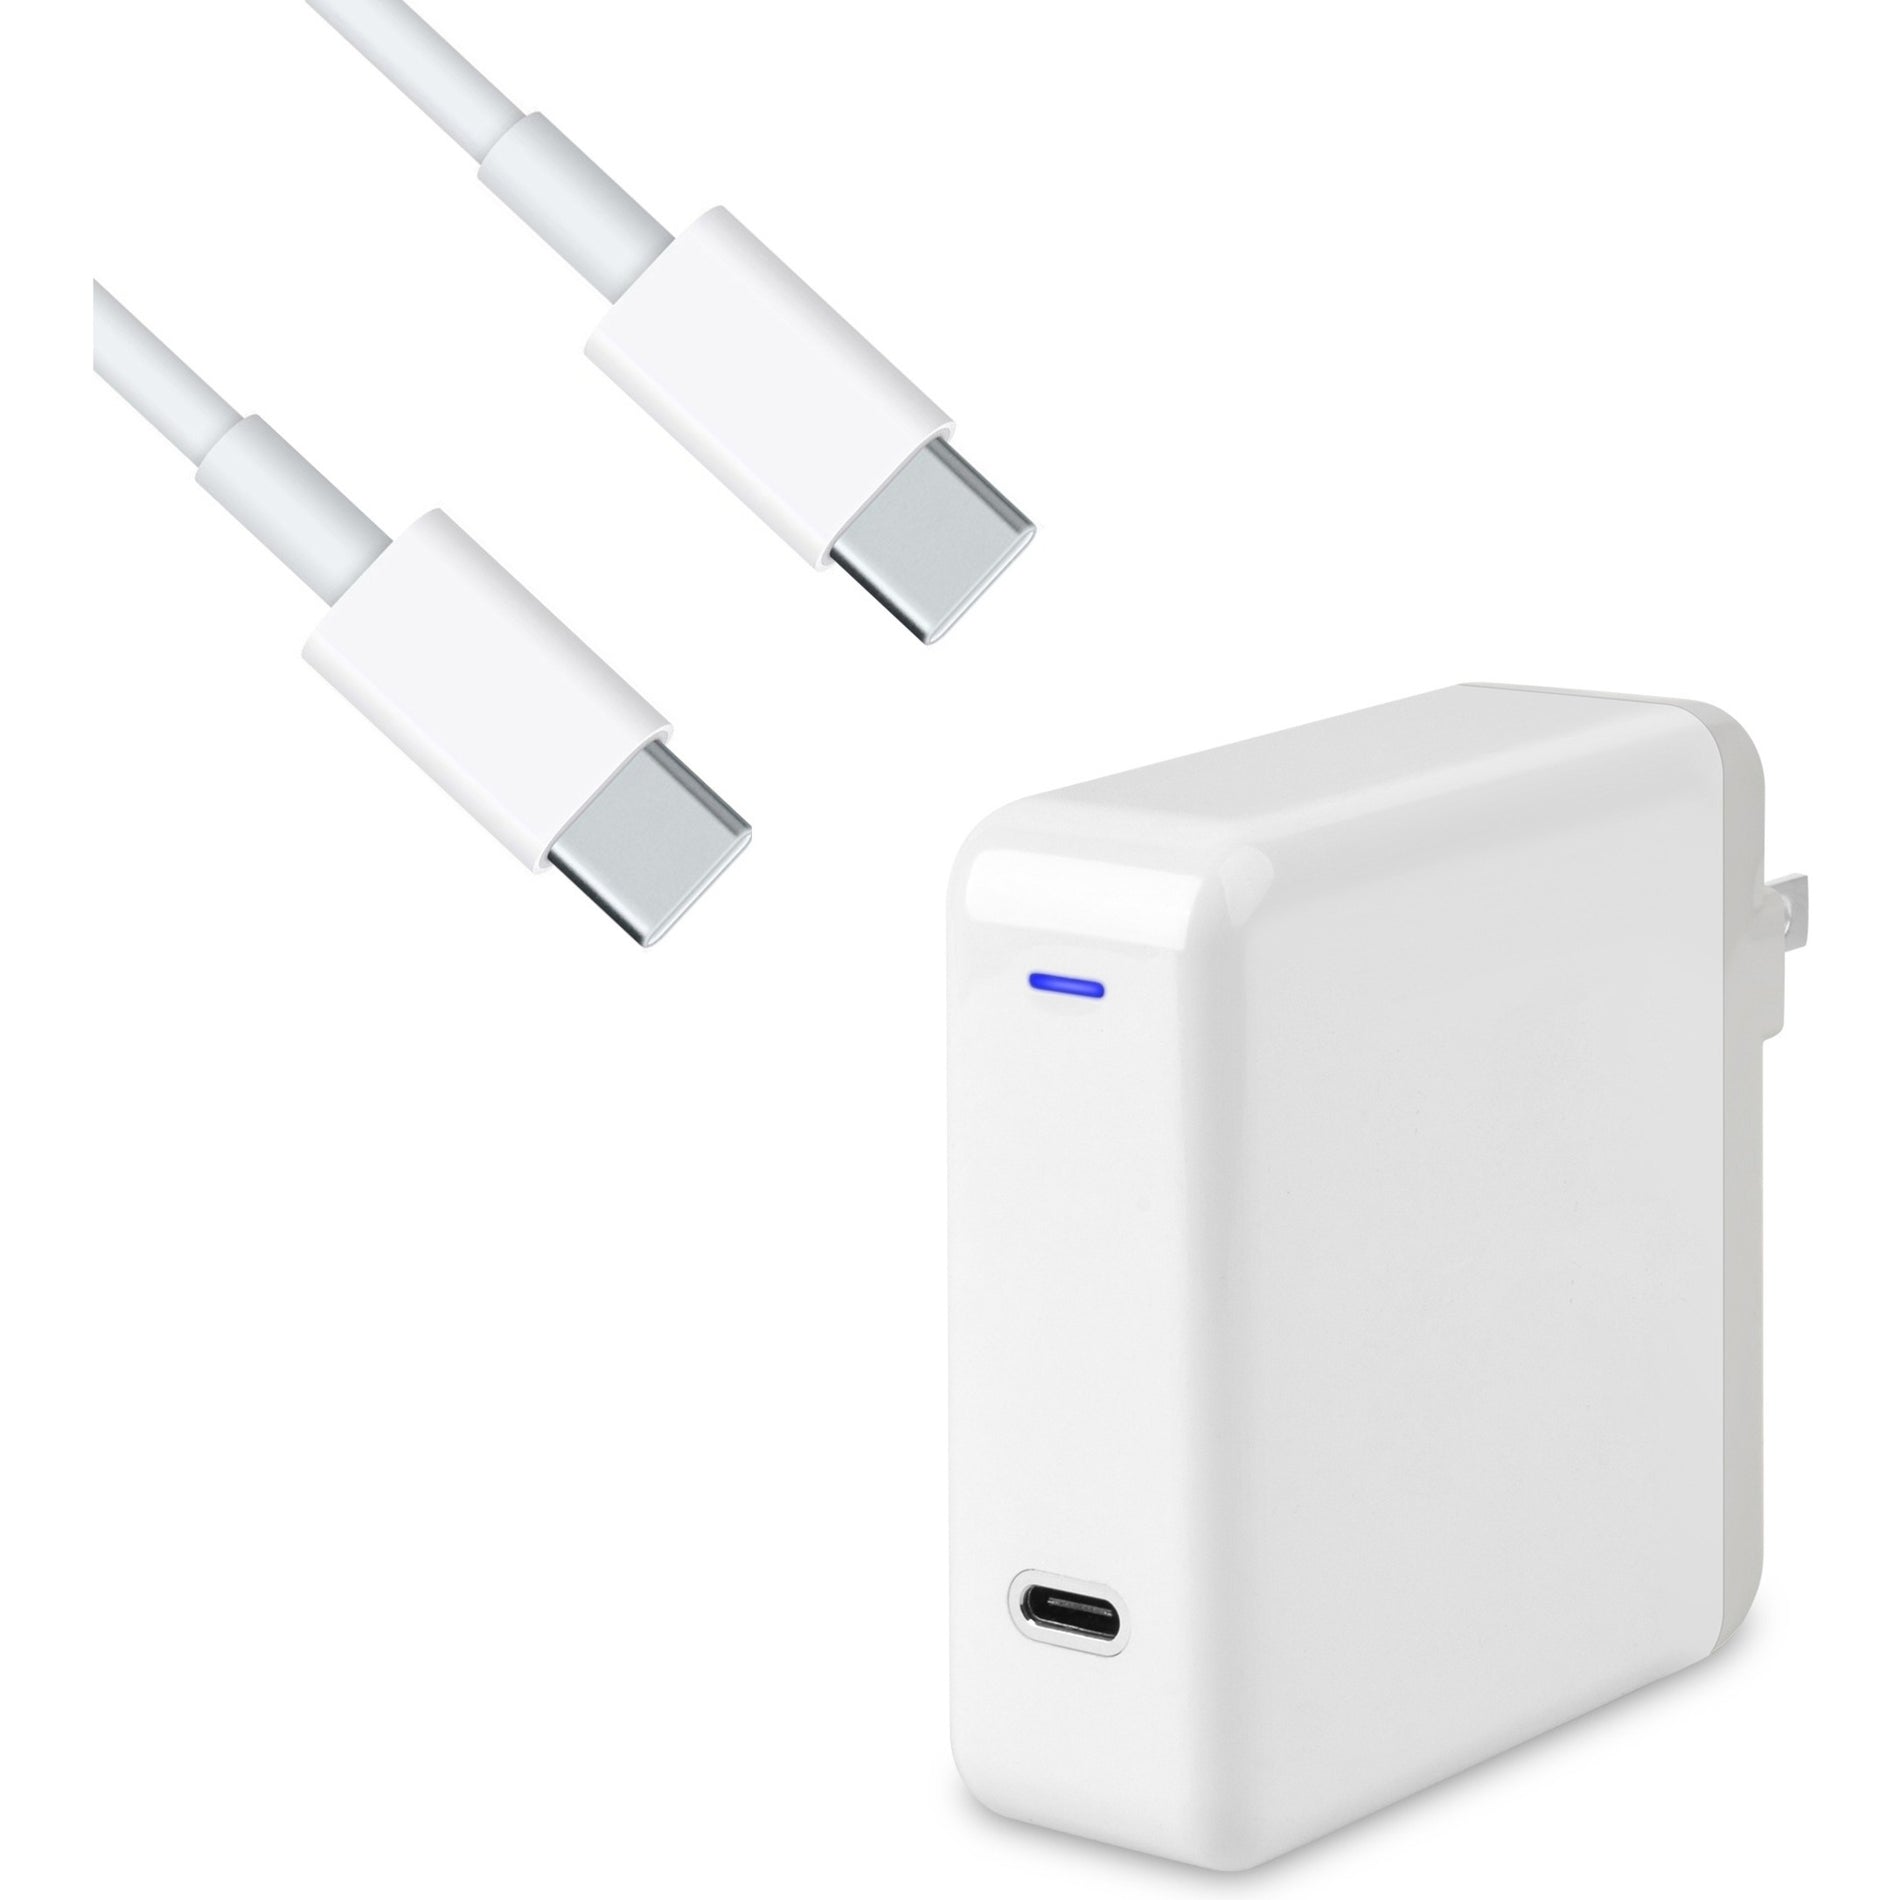 4XEM 4XMBOOKPROKIT96 Charging Kit Compatible for MacBook Pro, 96W USB-C Wall-Mounted Power Adapter, 6ft USB Type-C Cable